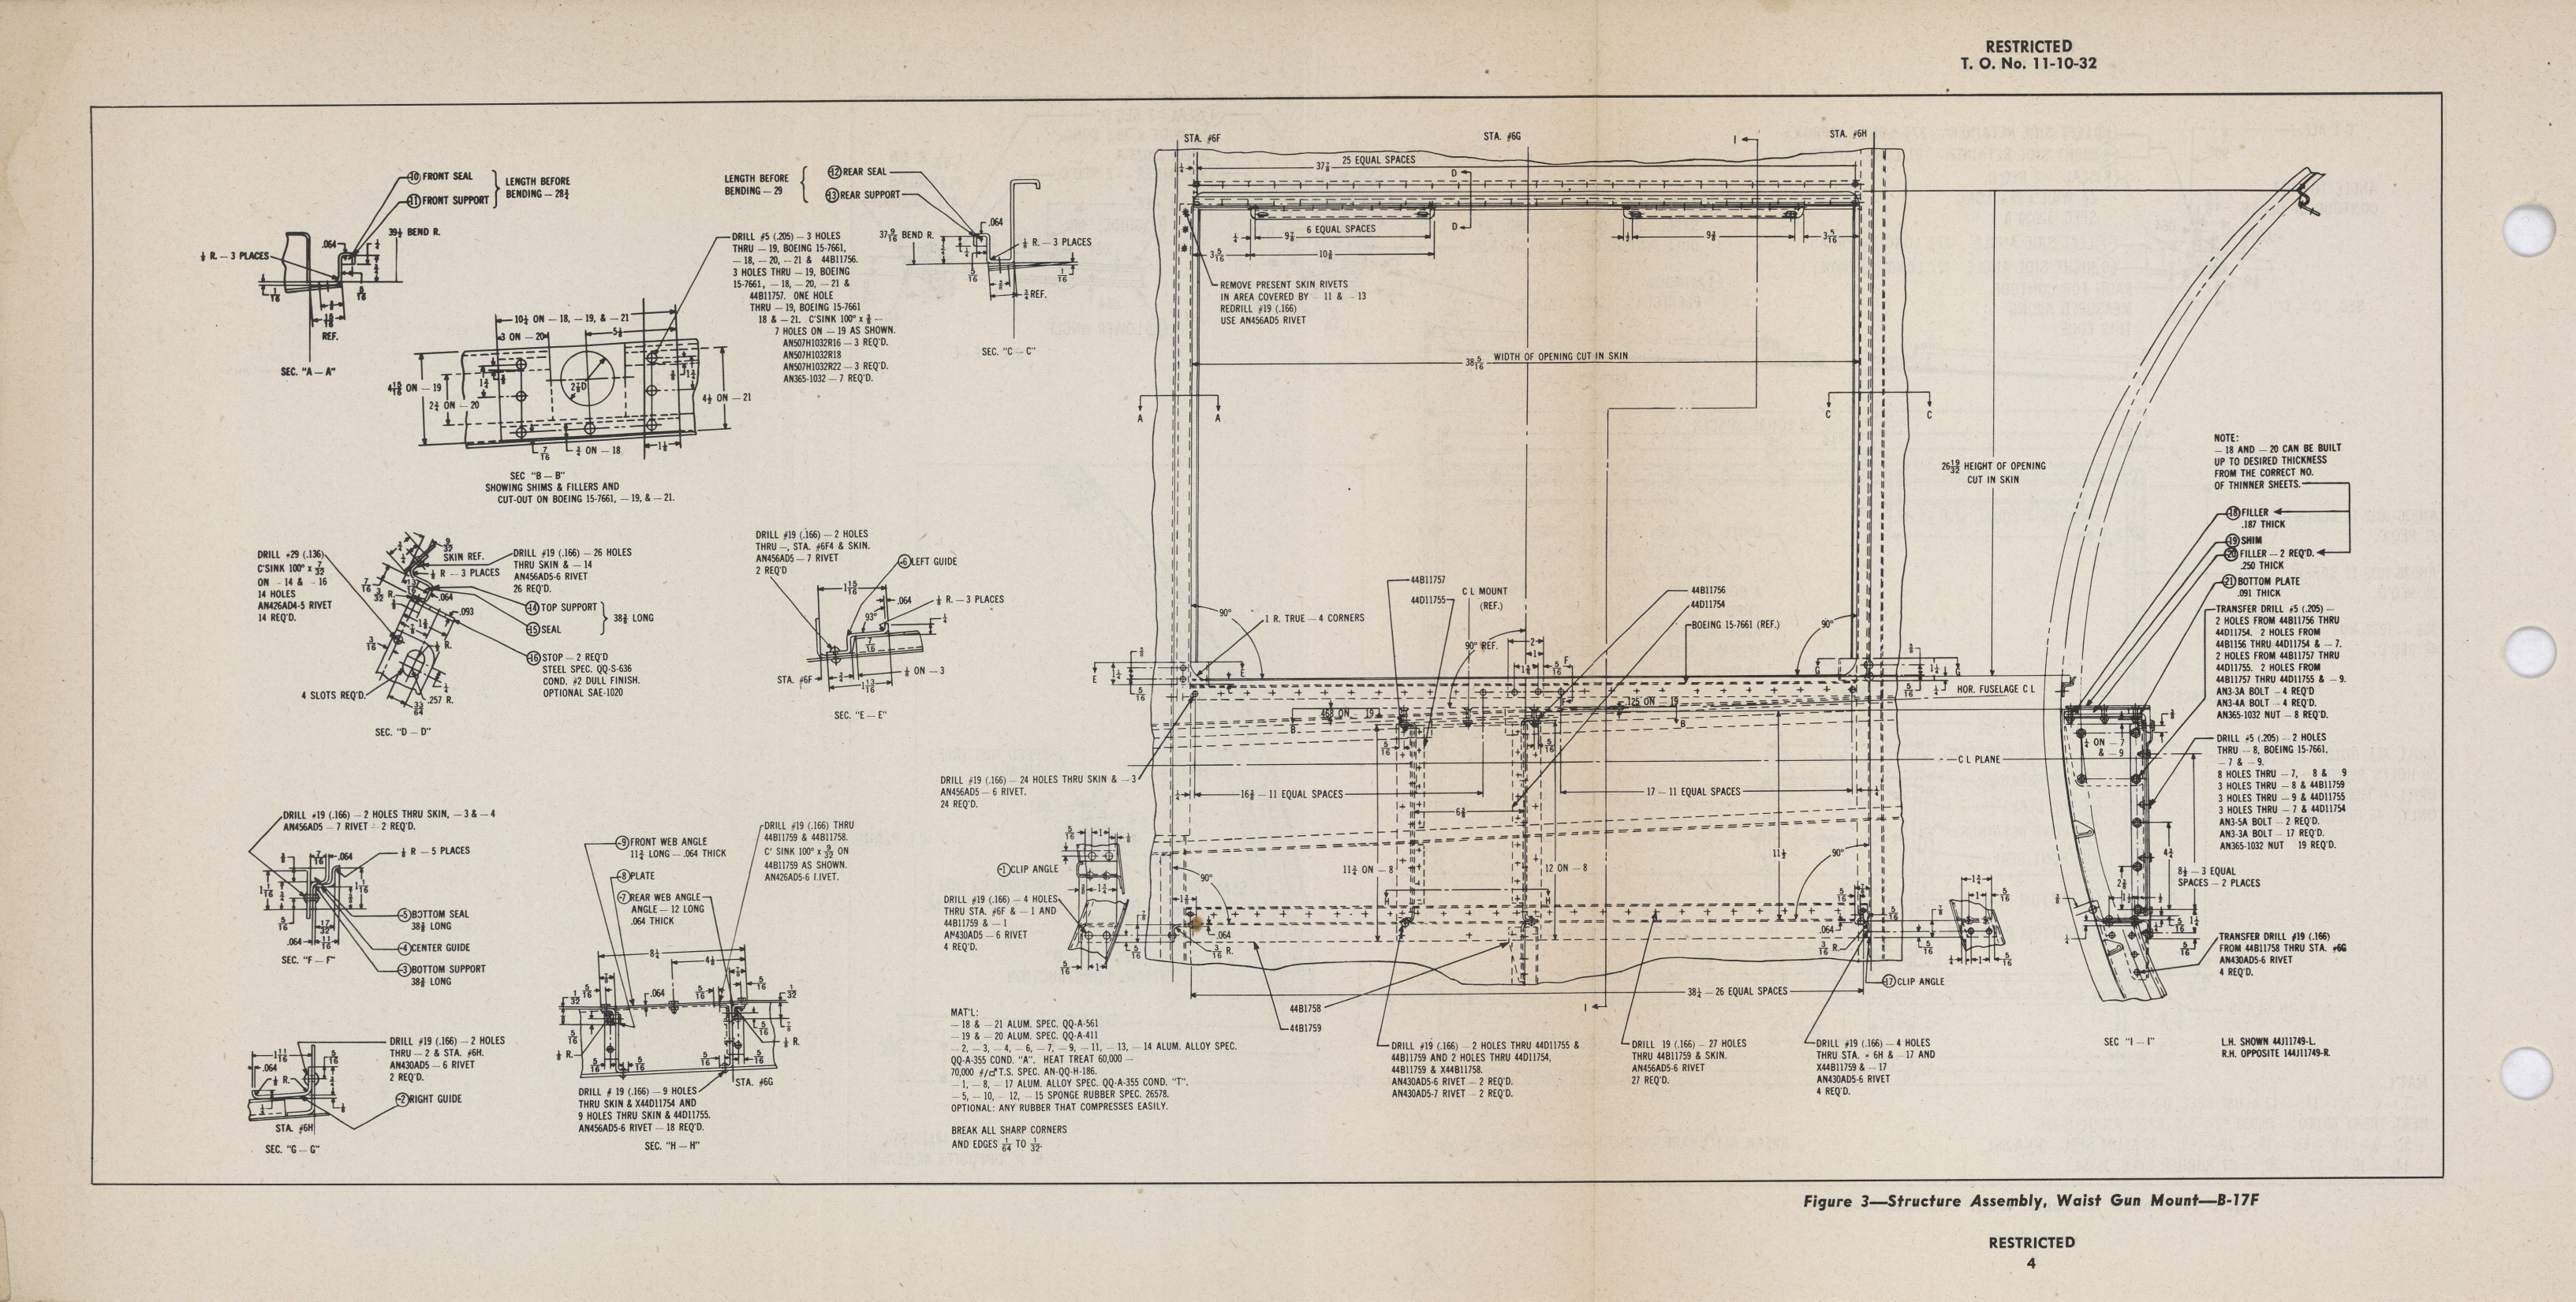 Sample page 8 from AirCorps Library document: Handbook of Instructions for the Installation of Type K-7 Gun Mount